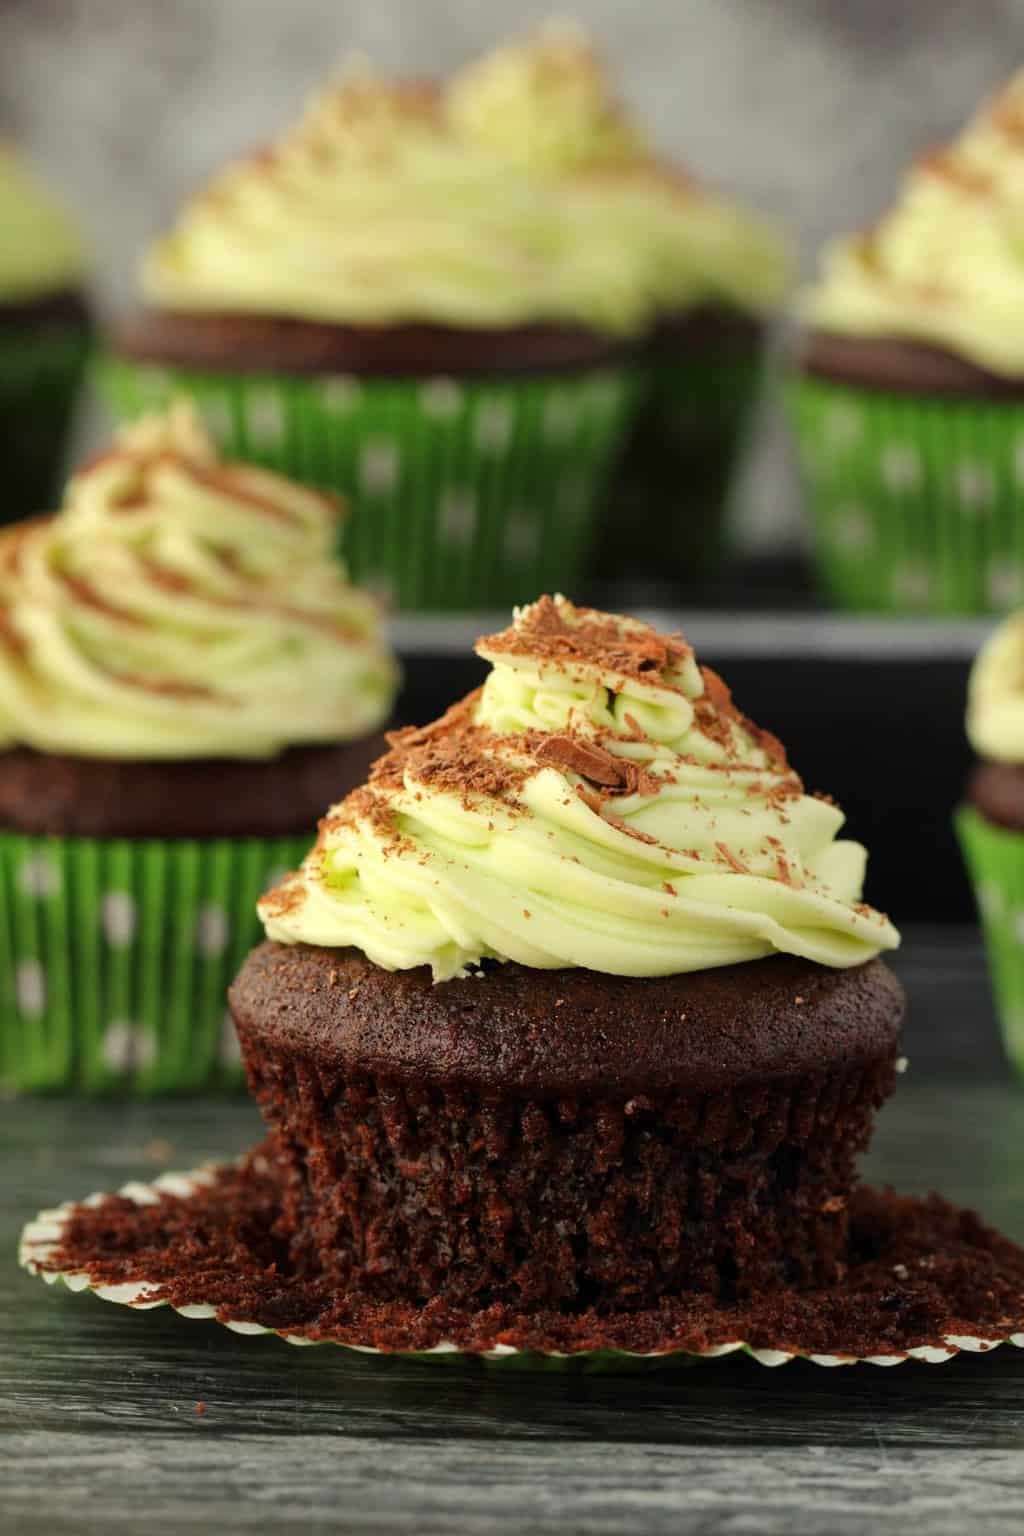 Vegan chocolate cupcakes topped with mint buttercream frosting and chocolate shavings.